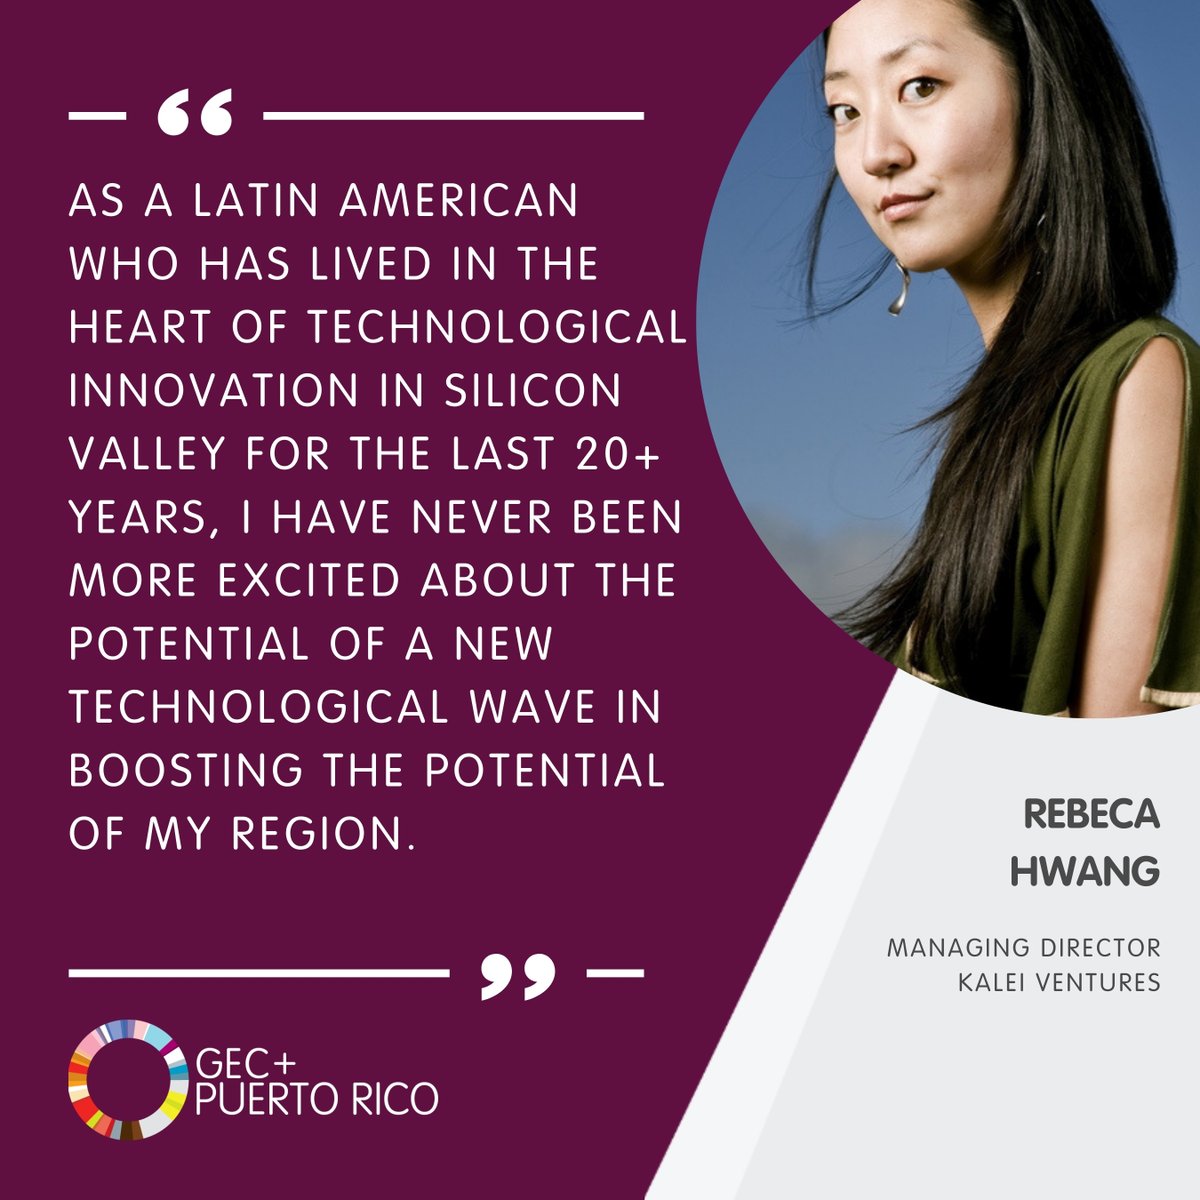 Join @rebecahwang at GEC+Puerto Rico as we explore an ambitious roadmap for a more vibrant and thriving economy. Tickets: genglobal.org/gec-plus/puert… #GECPlusPR #startup #entrepreneur #innovation #tech #AI #womenintech #mujeresentec #empredimiento #inversionistas #emprendedores